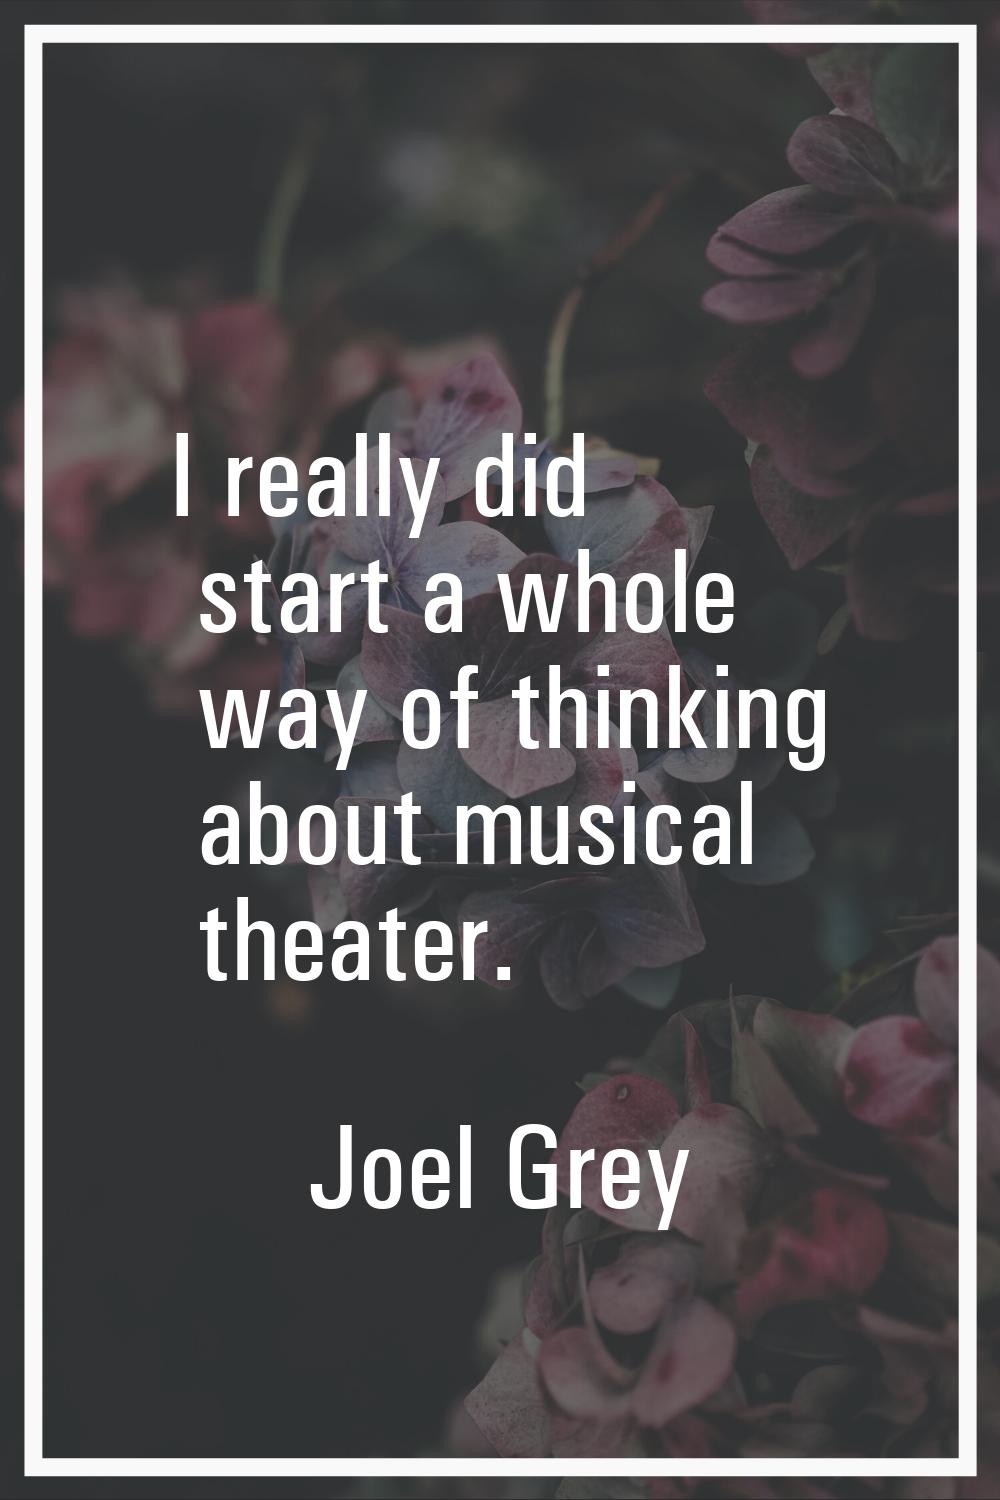 I really did start a whole way of thinking about musical theater.